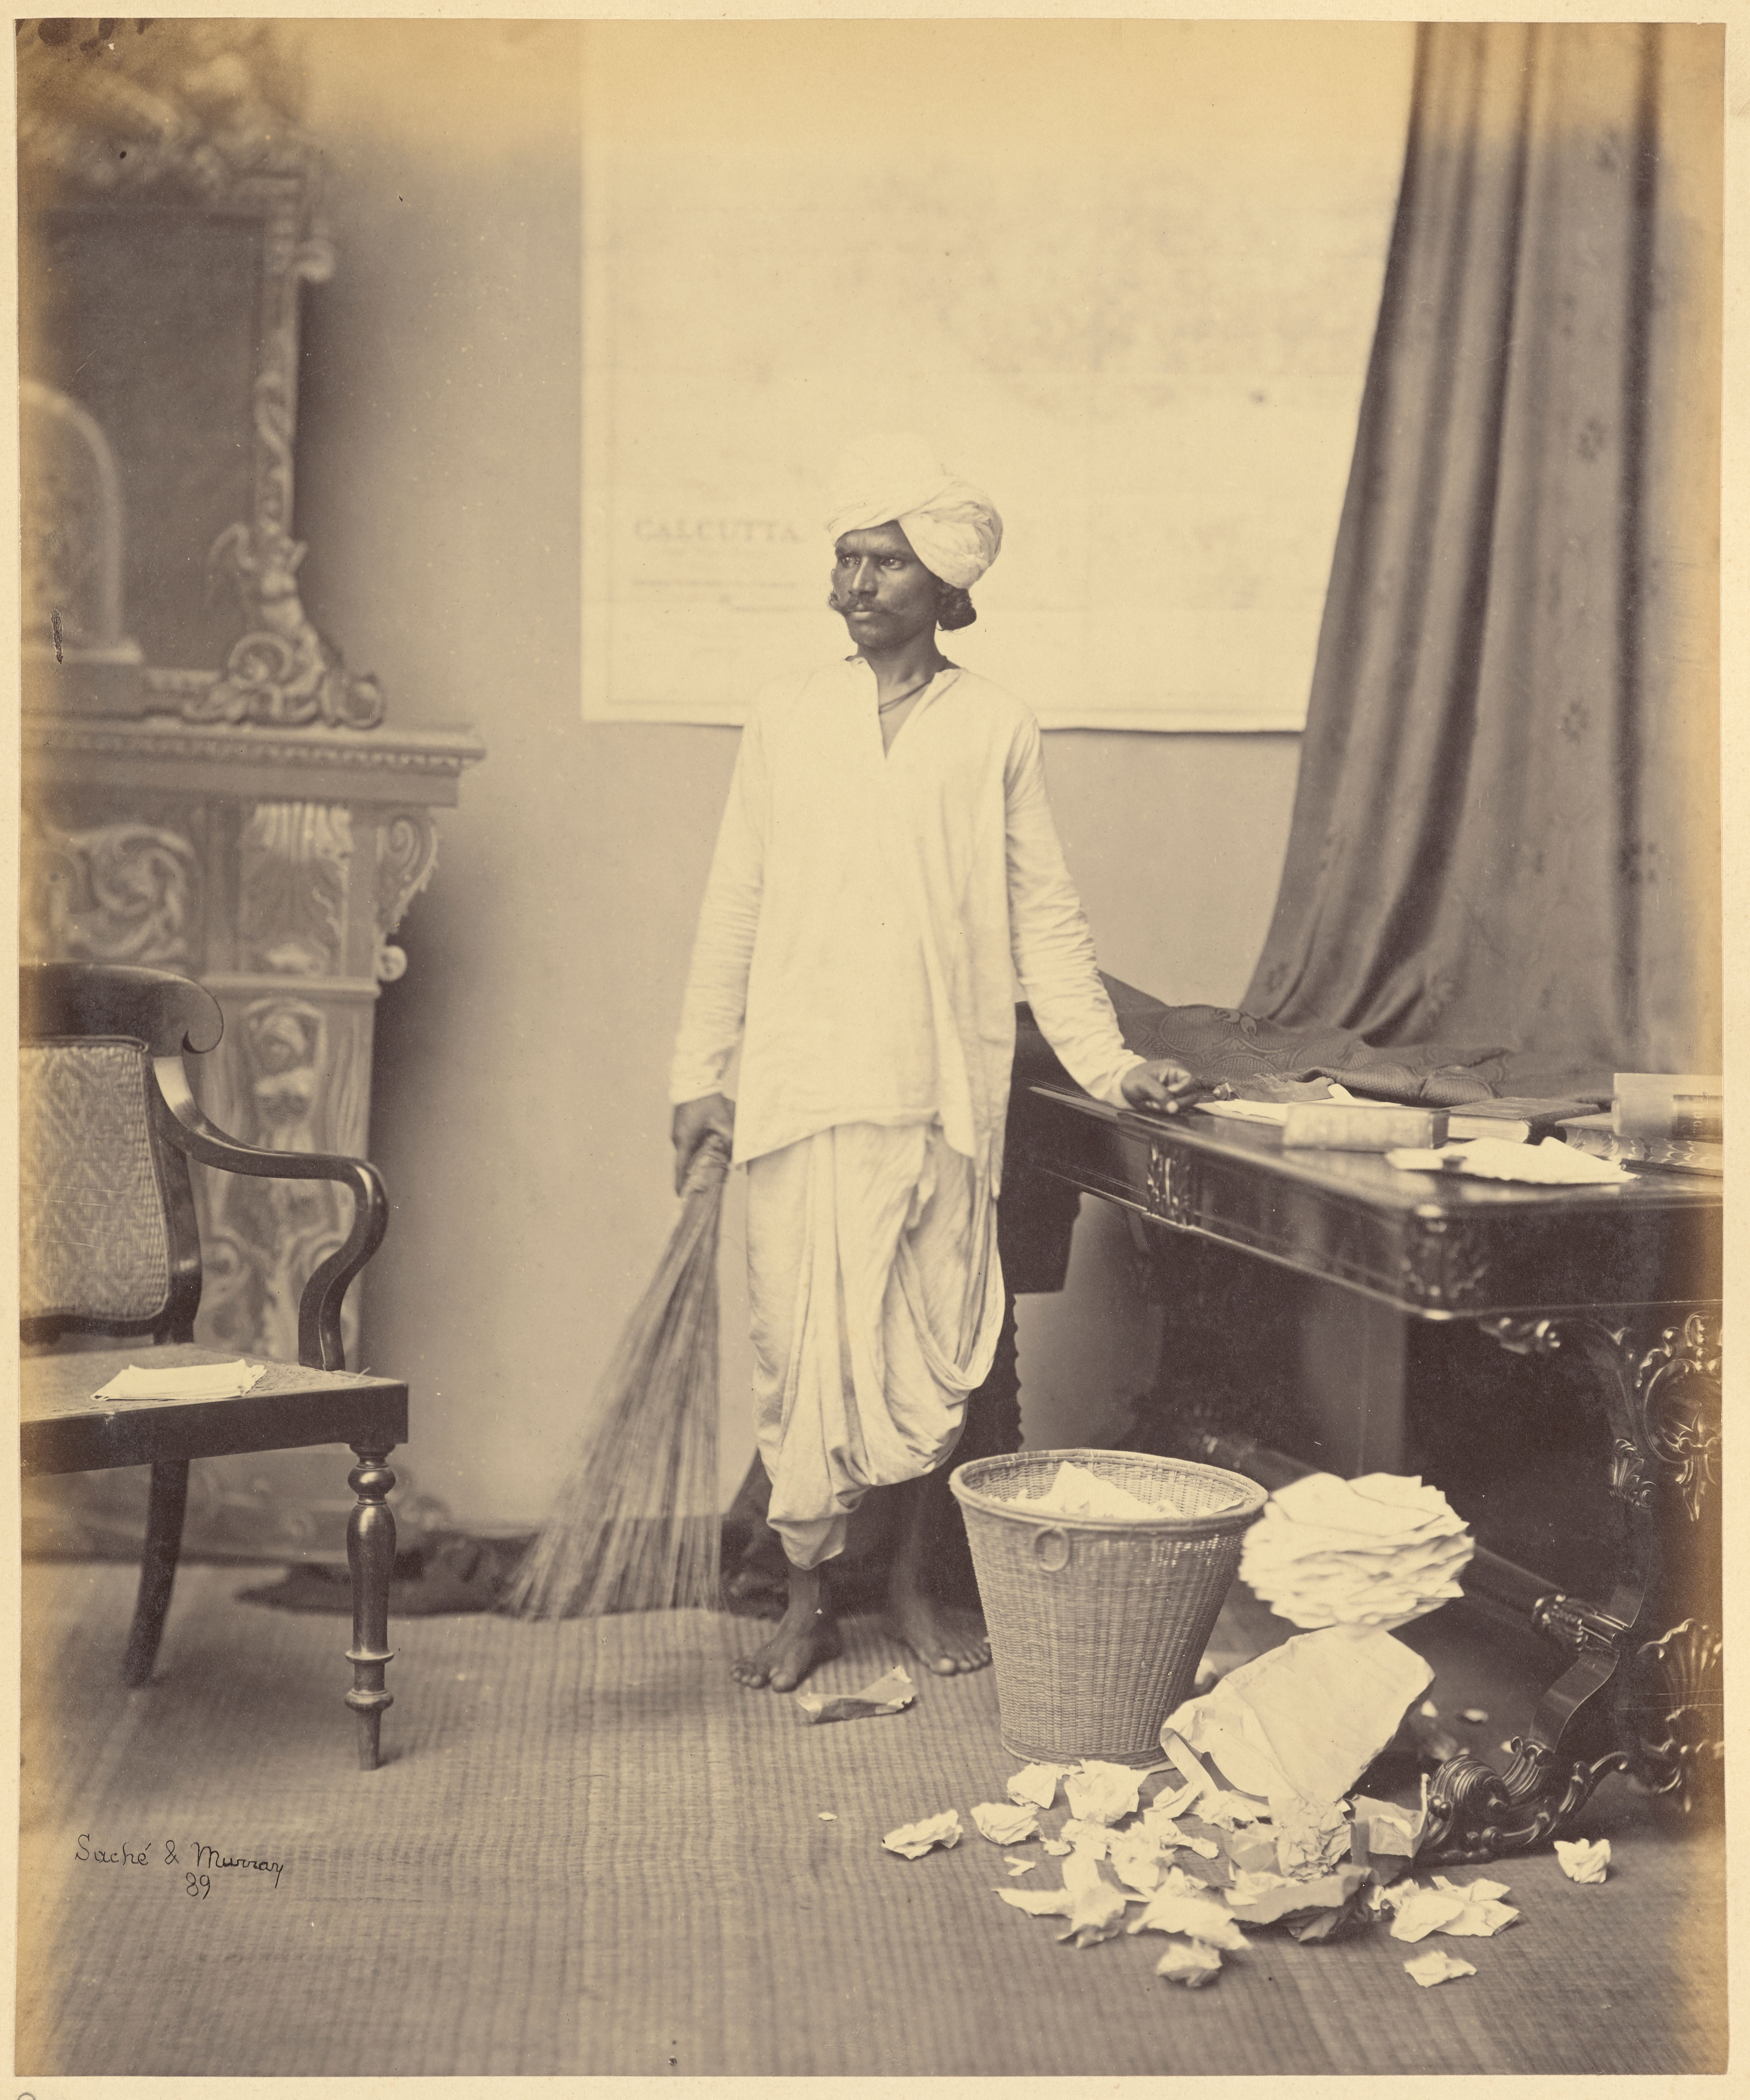 Studio Portrait of a Man as a Mehtar, or a Sweeper - Circa 1860s